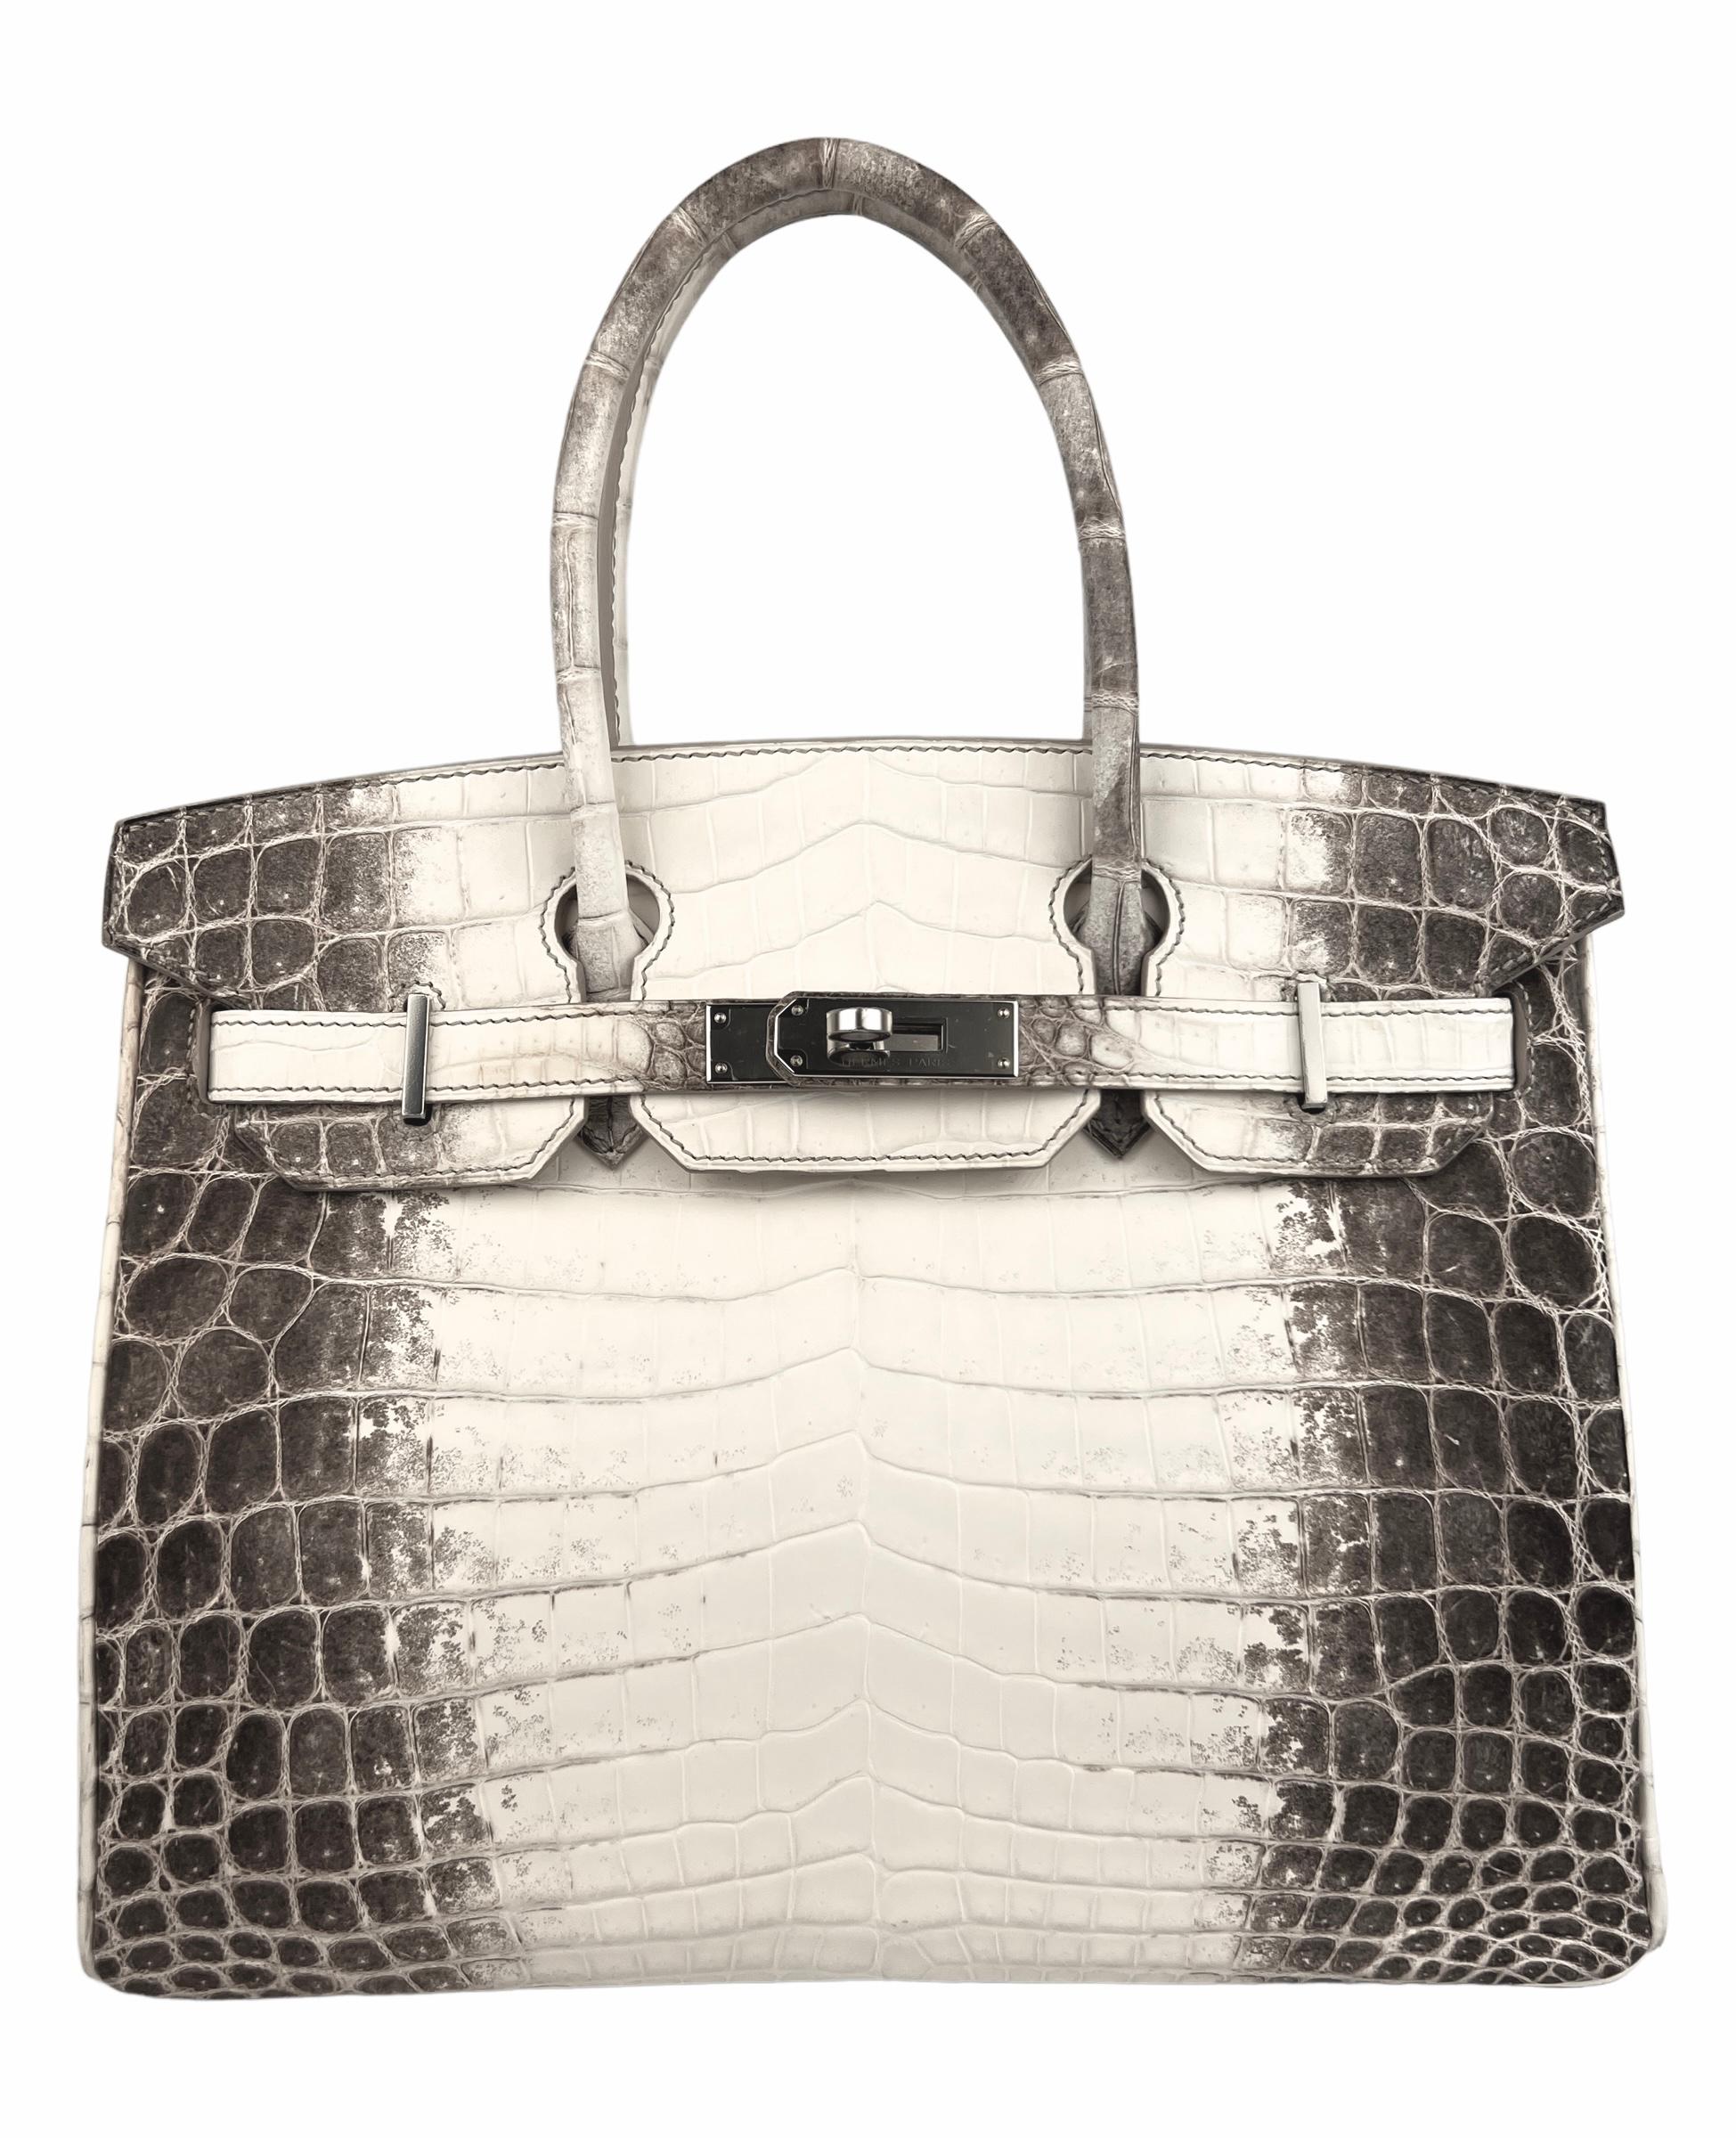 Up for sale is hardest to obtain Holy Grail and Rarest Handbag in the World! Hermes Birkin 30 Matte White Himalayan Niloticus Crocodile Palladium Hardware. As New 2018 C Stamp. Includes all Accessories and Box.

Shop with Confidence from Lux